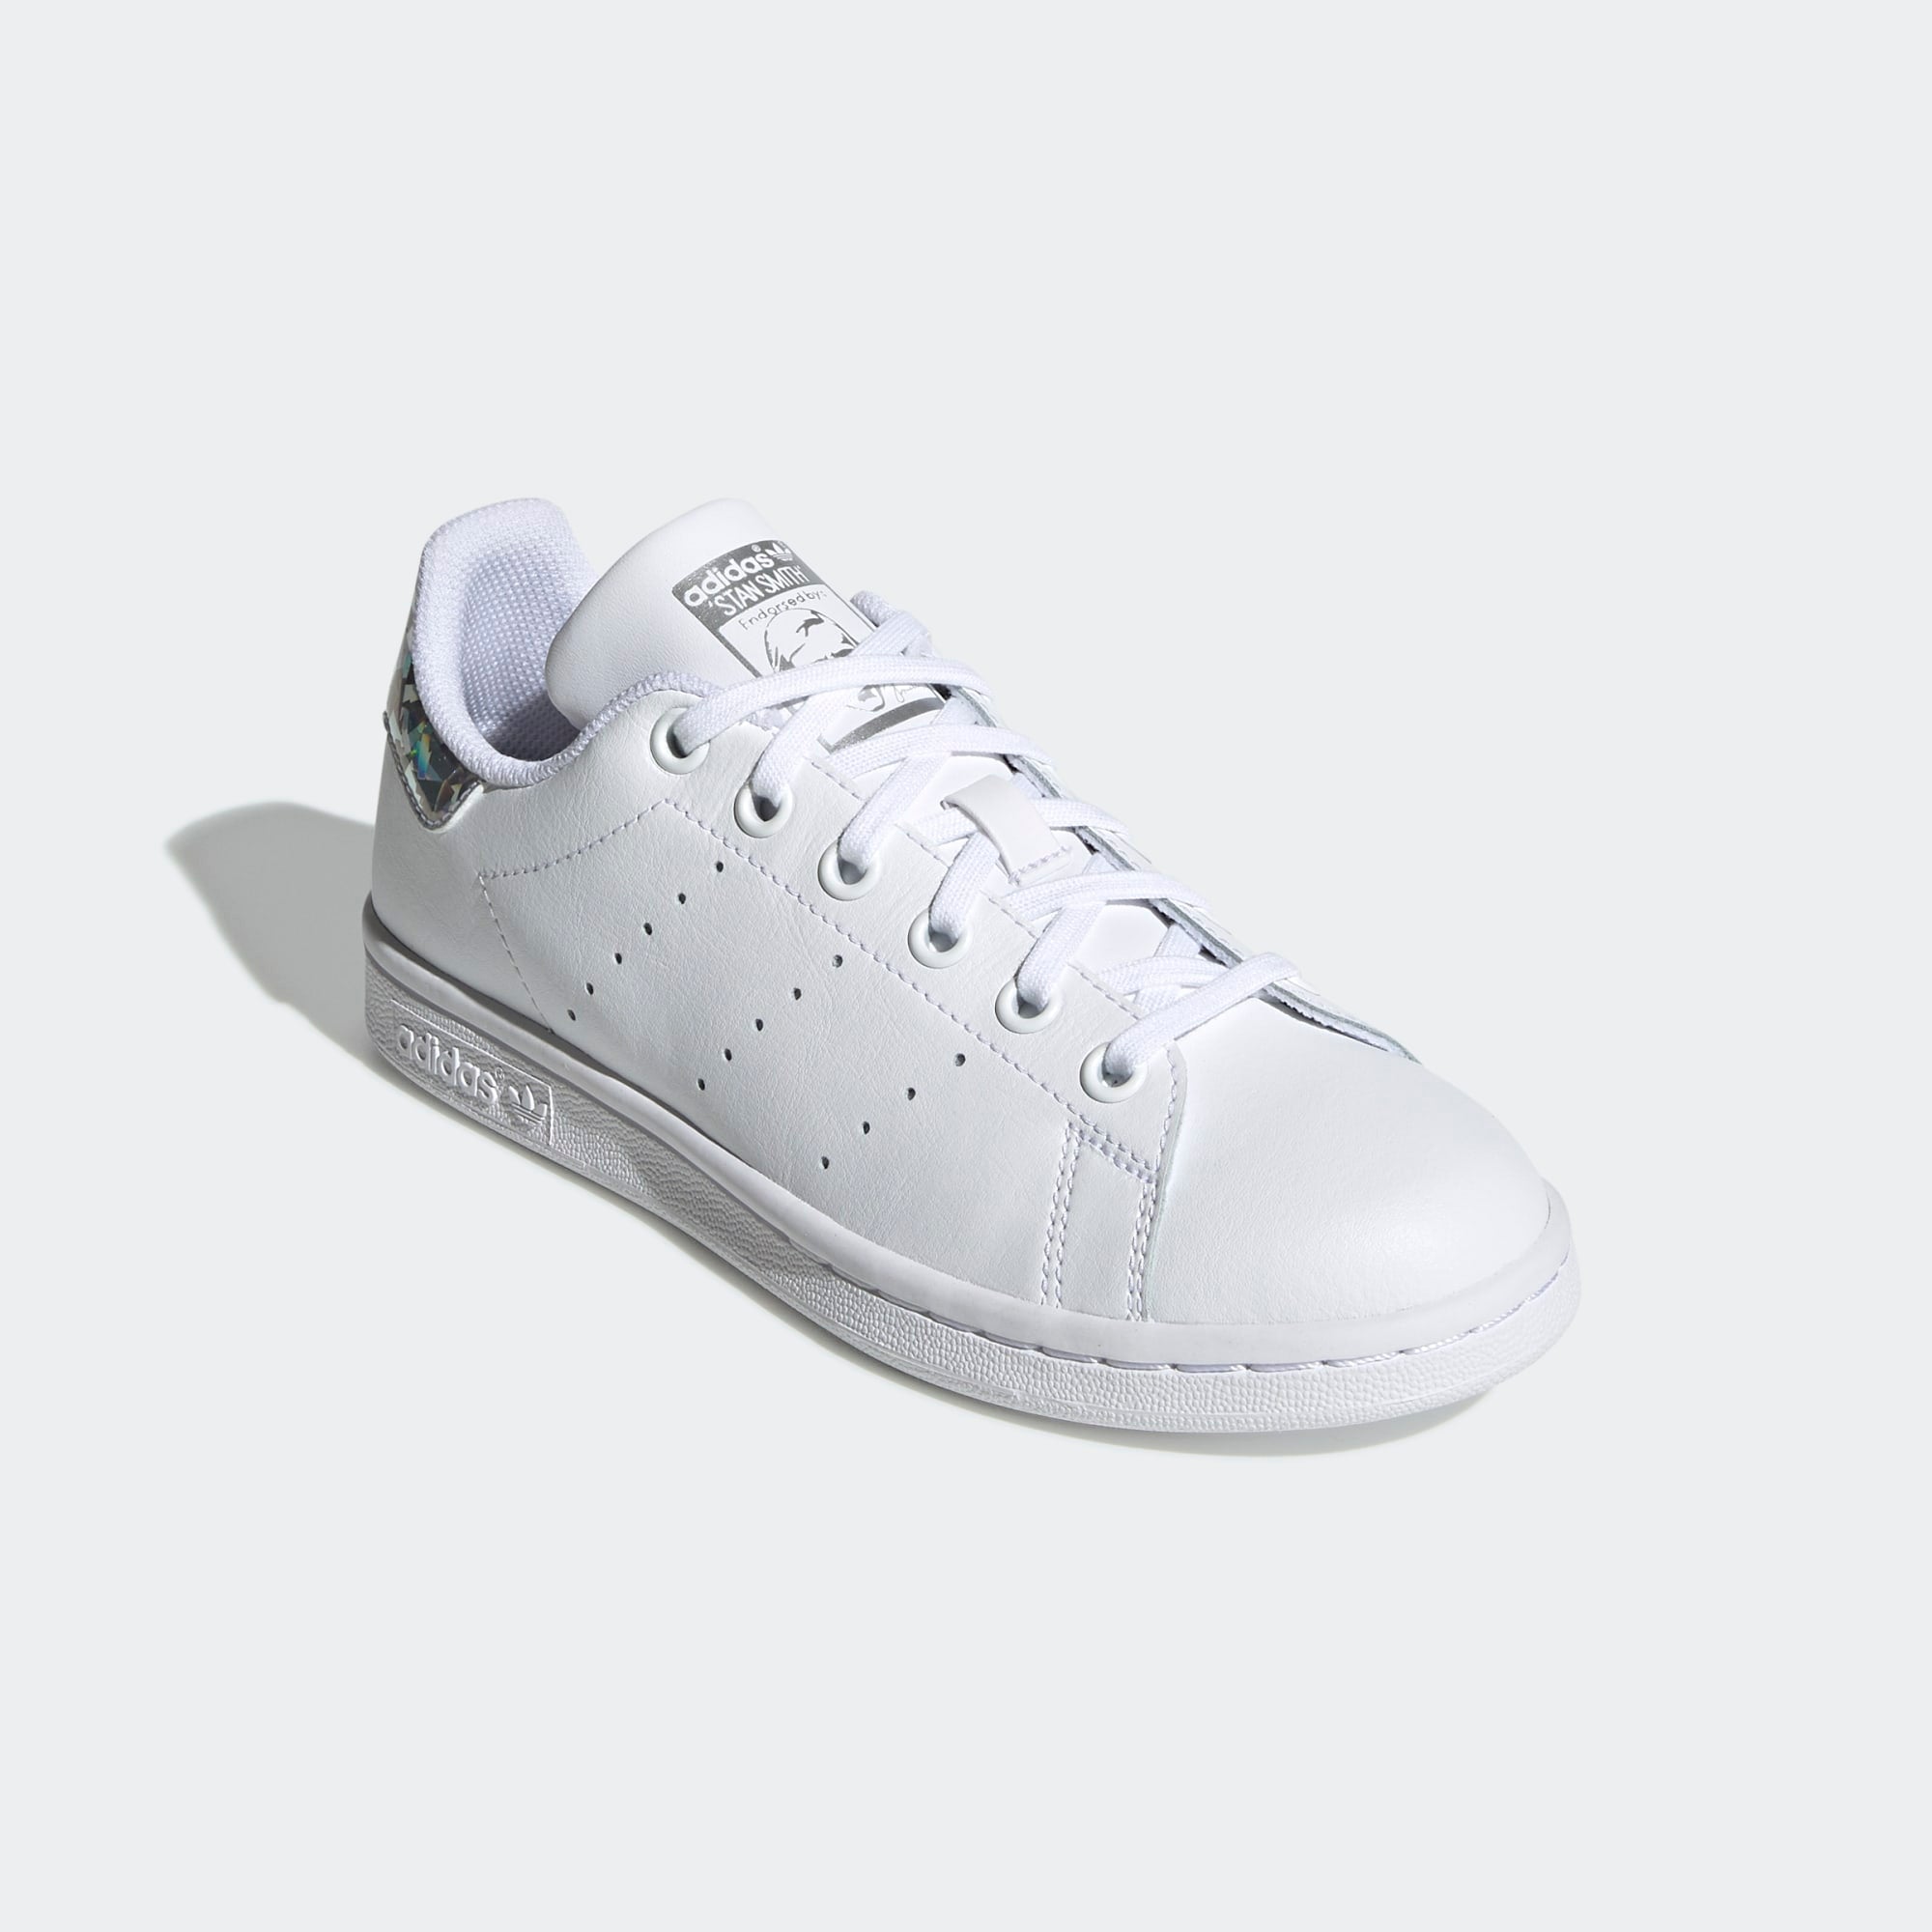 last Wegenbouwproces weerstand adidas Stan Smith Shoes White Silver Iridescent EE8483 | Chicago City Sports